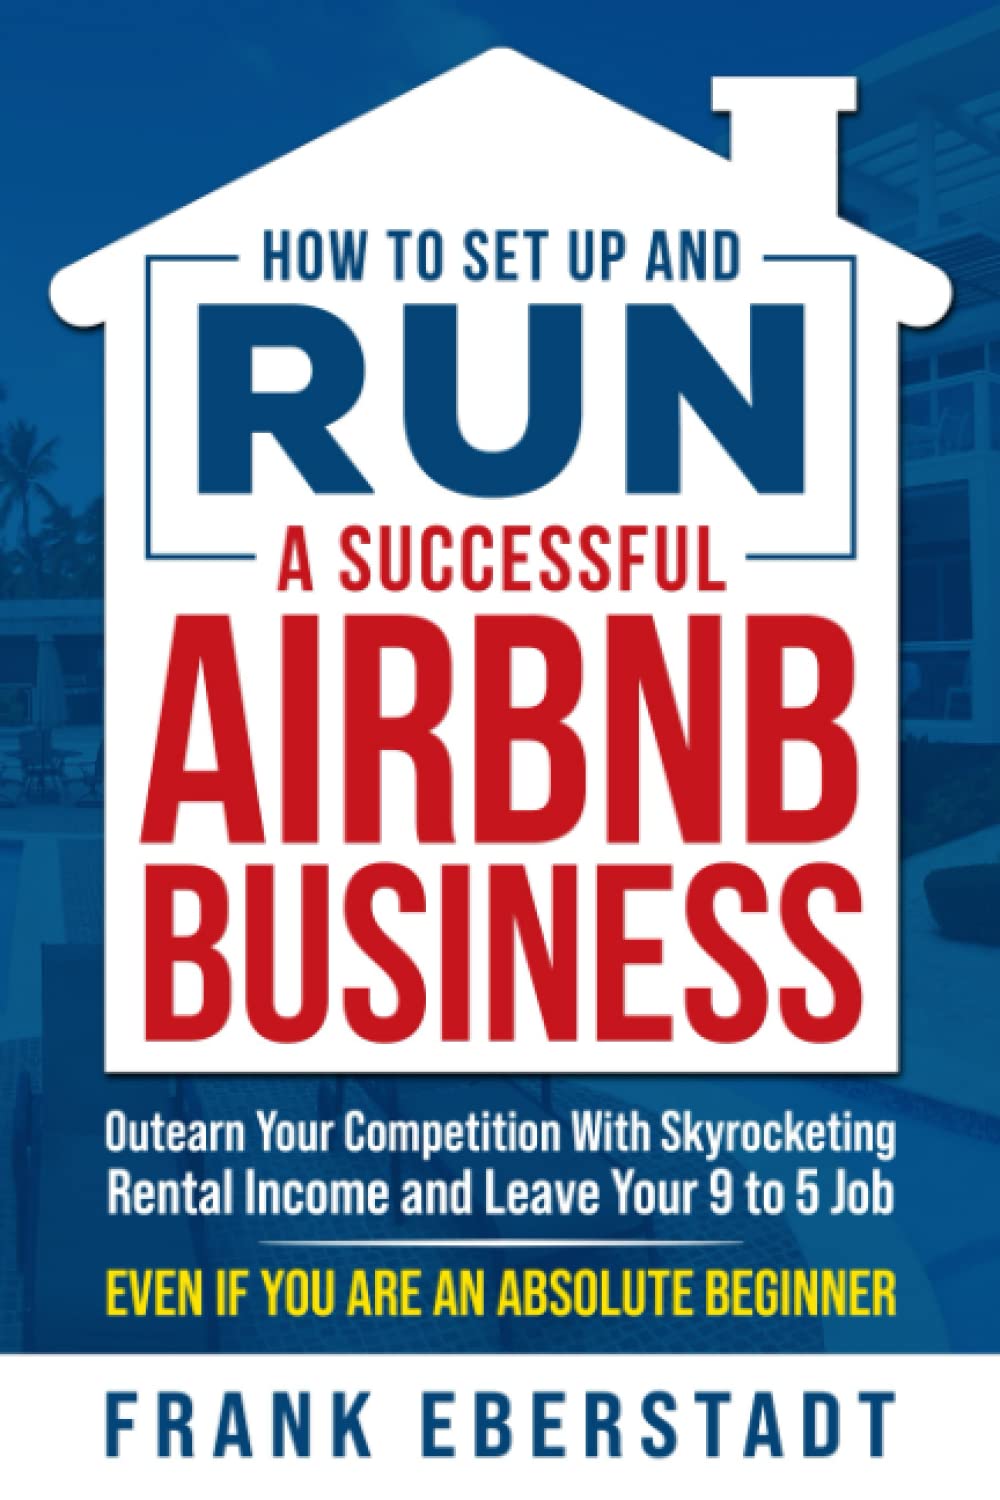 How to Set Up and Run A Successful Airbnb Business by Frank Eberstadt